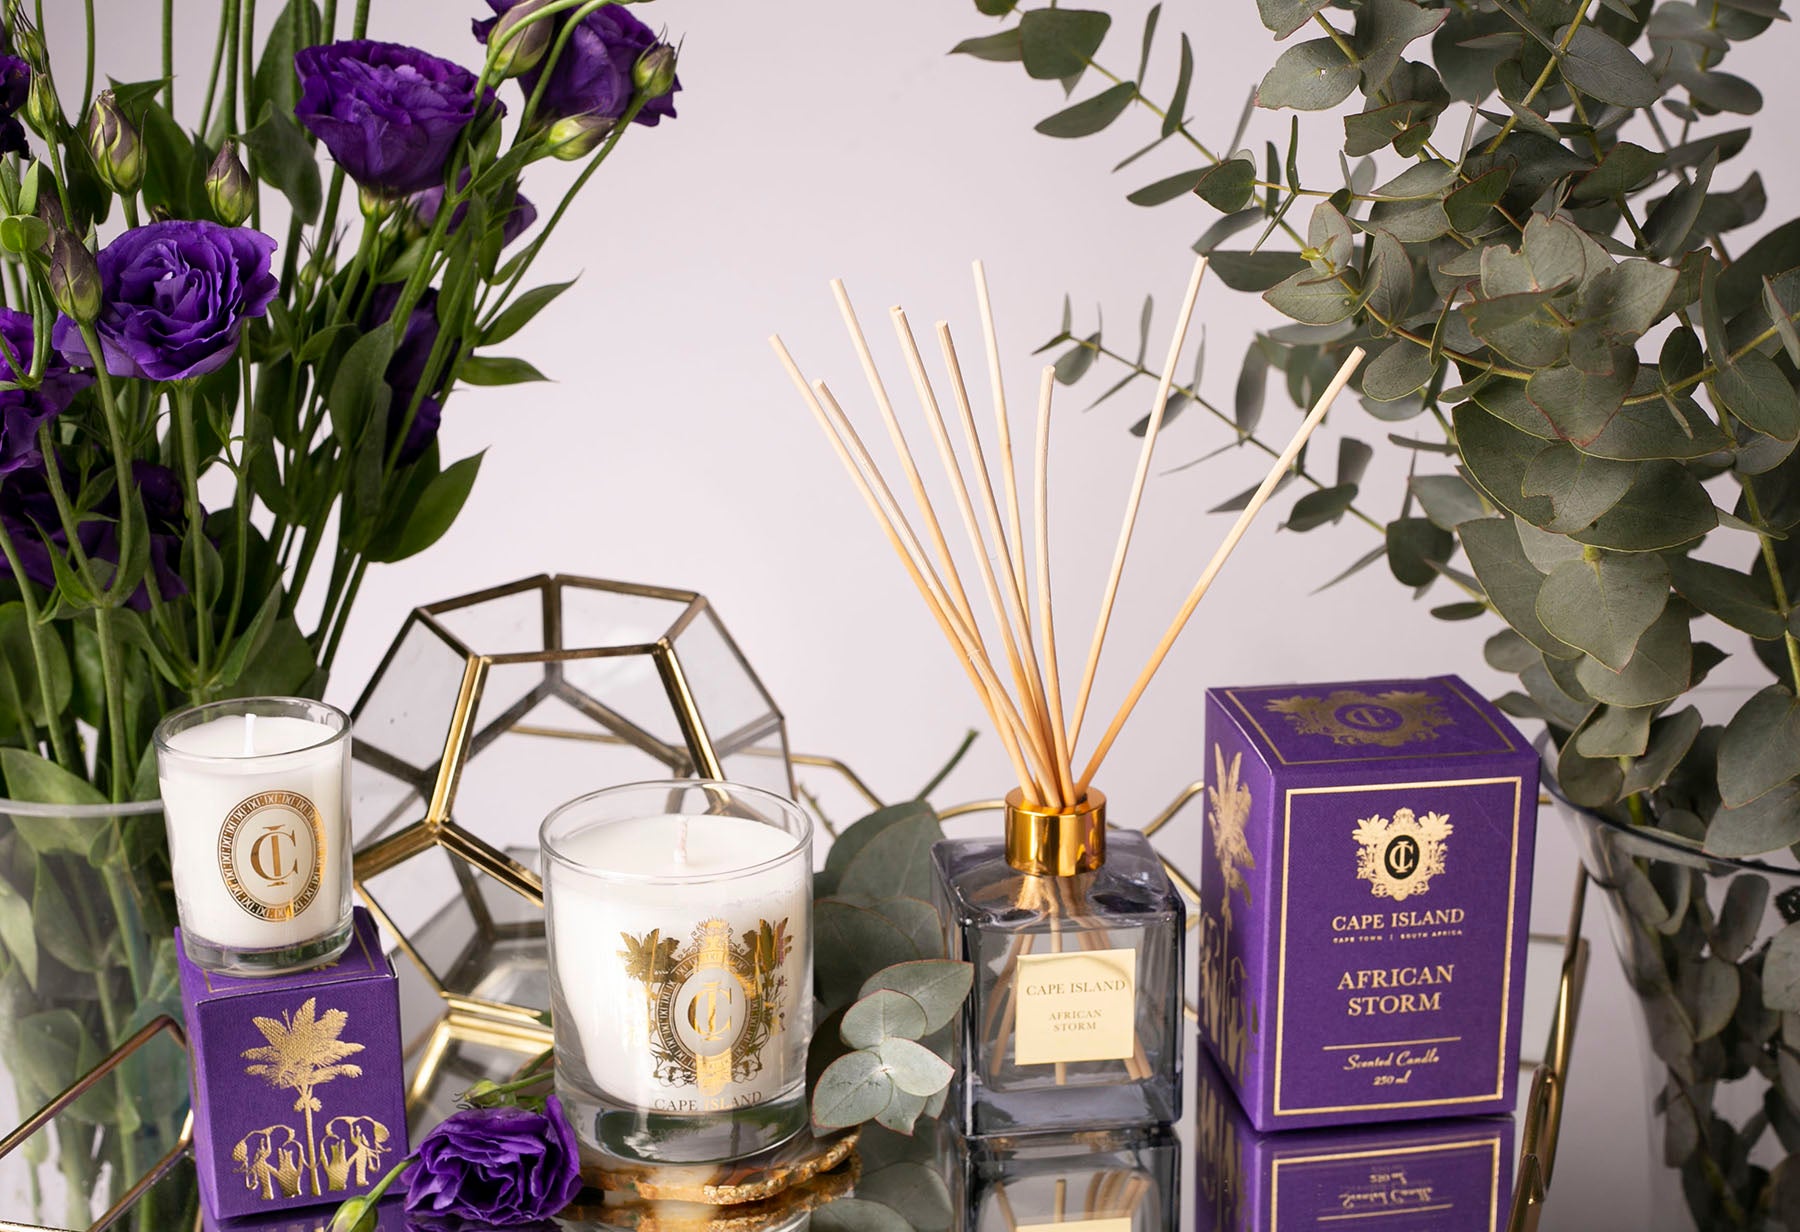 The Cape Island African Storm fragrance diffuser and candle. Cape Island luxury candles, soap products and home fragrances are available at Sarza home goods and furniture store in Rye New York.